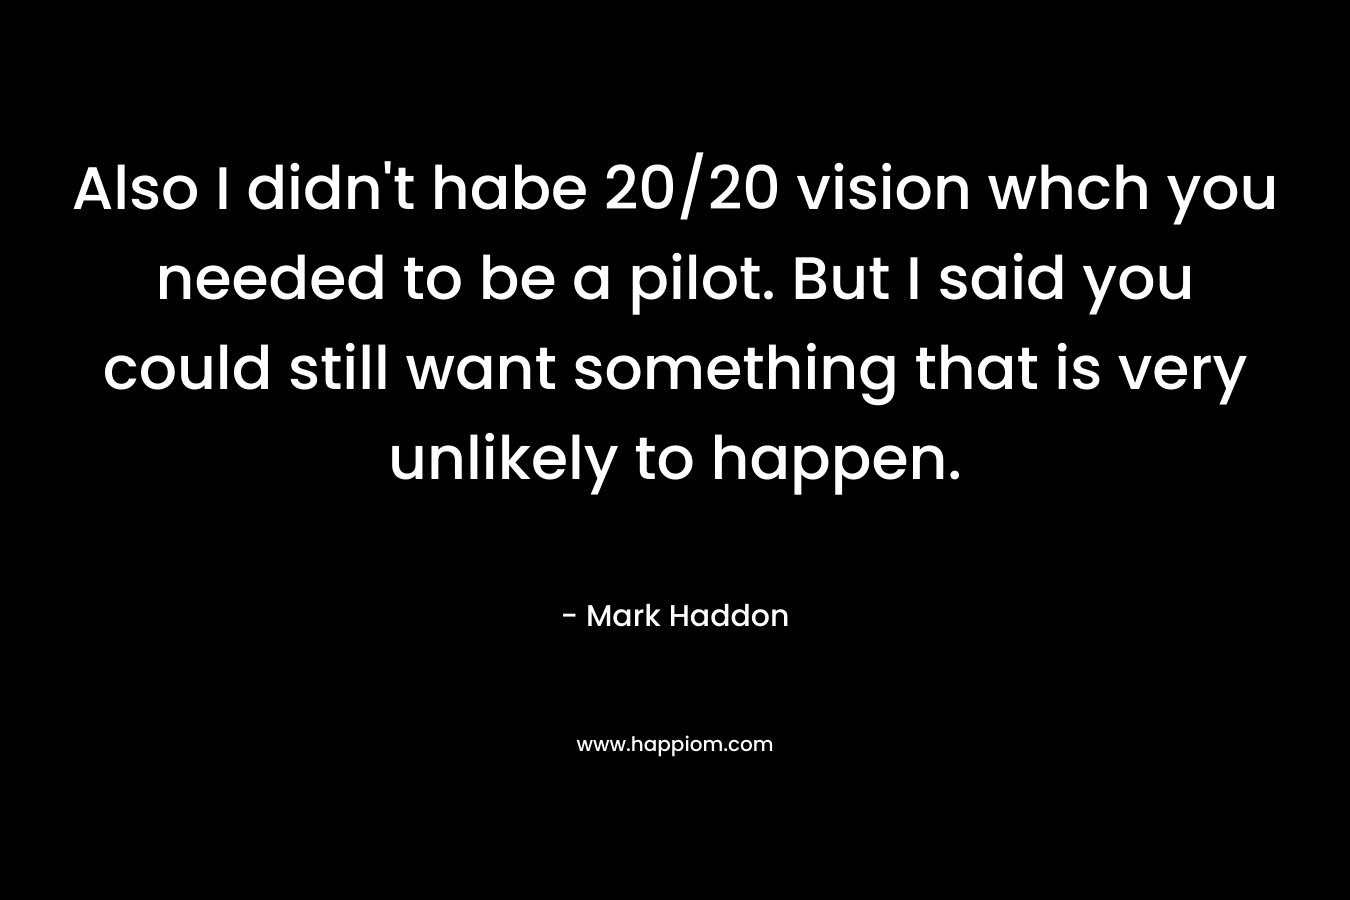 Also I didn't habe 20/20 vision whch you needed to be a pilot. But I said you could still want something that is very unlikely to happen.